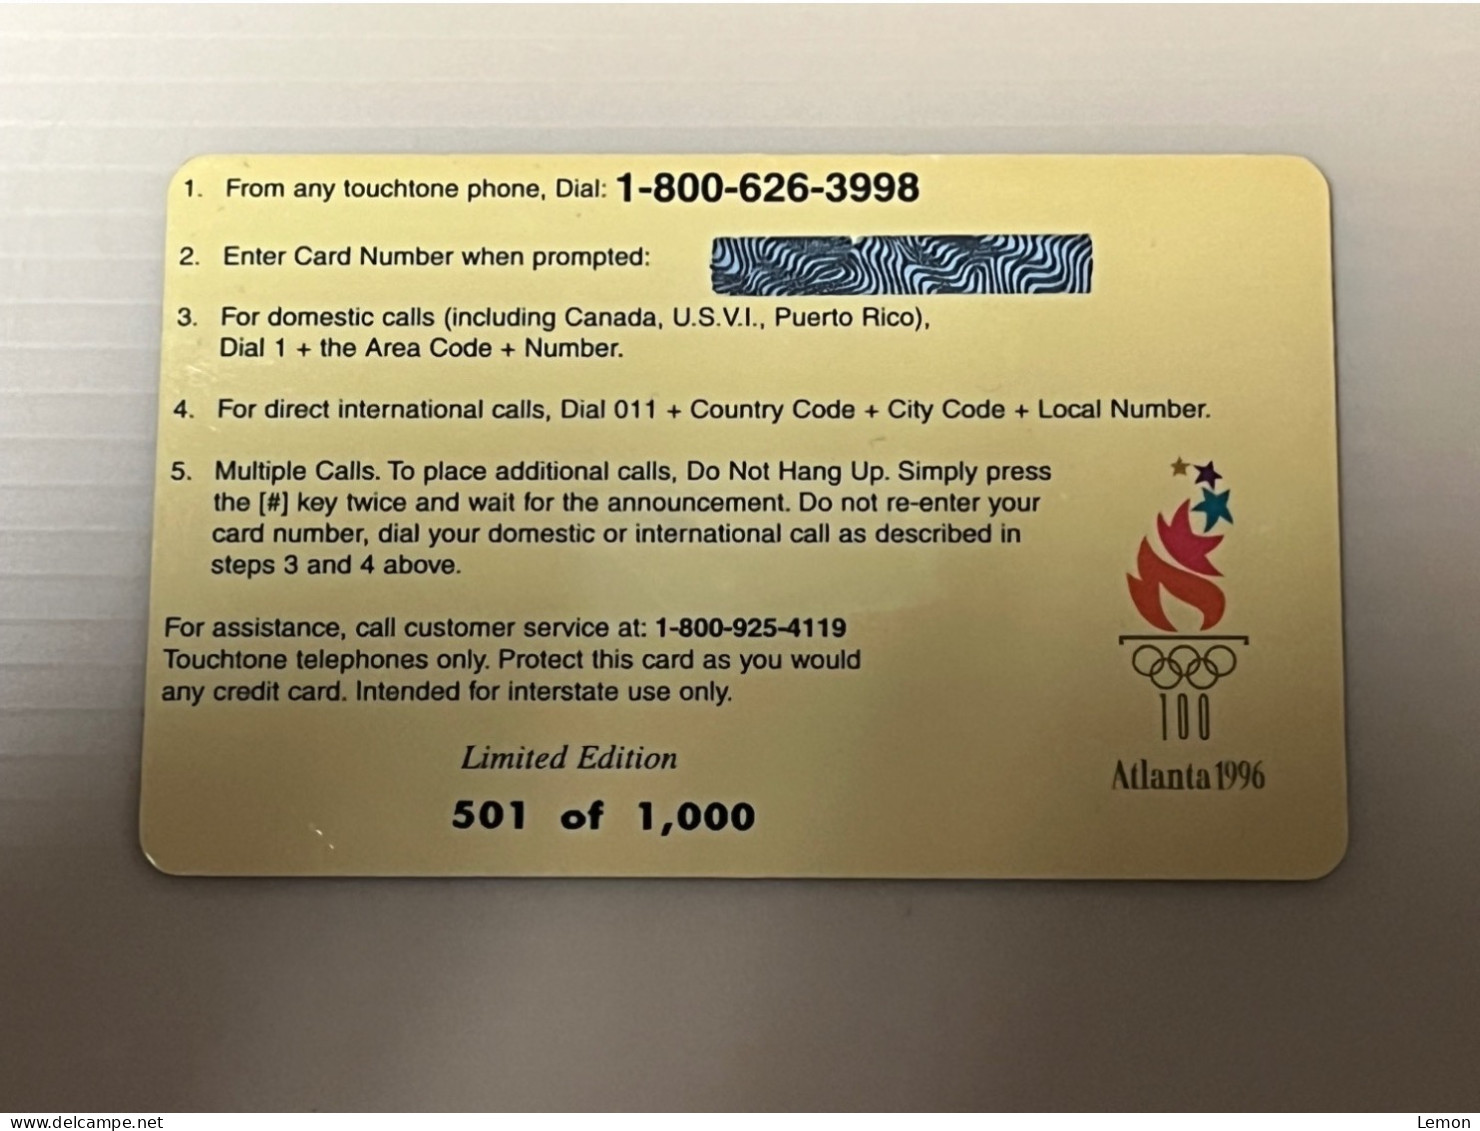 Mint USA UNITED STATES America Prepaid Telecard Phonecard, Welcome To Atlanta 1996 Olympic, Set Of 1 Mint Card - Sprint